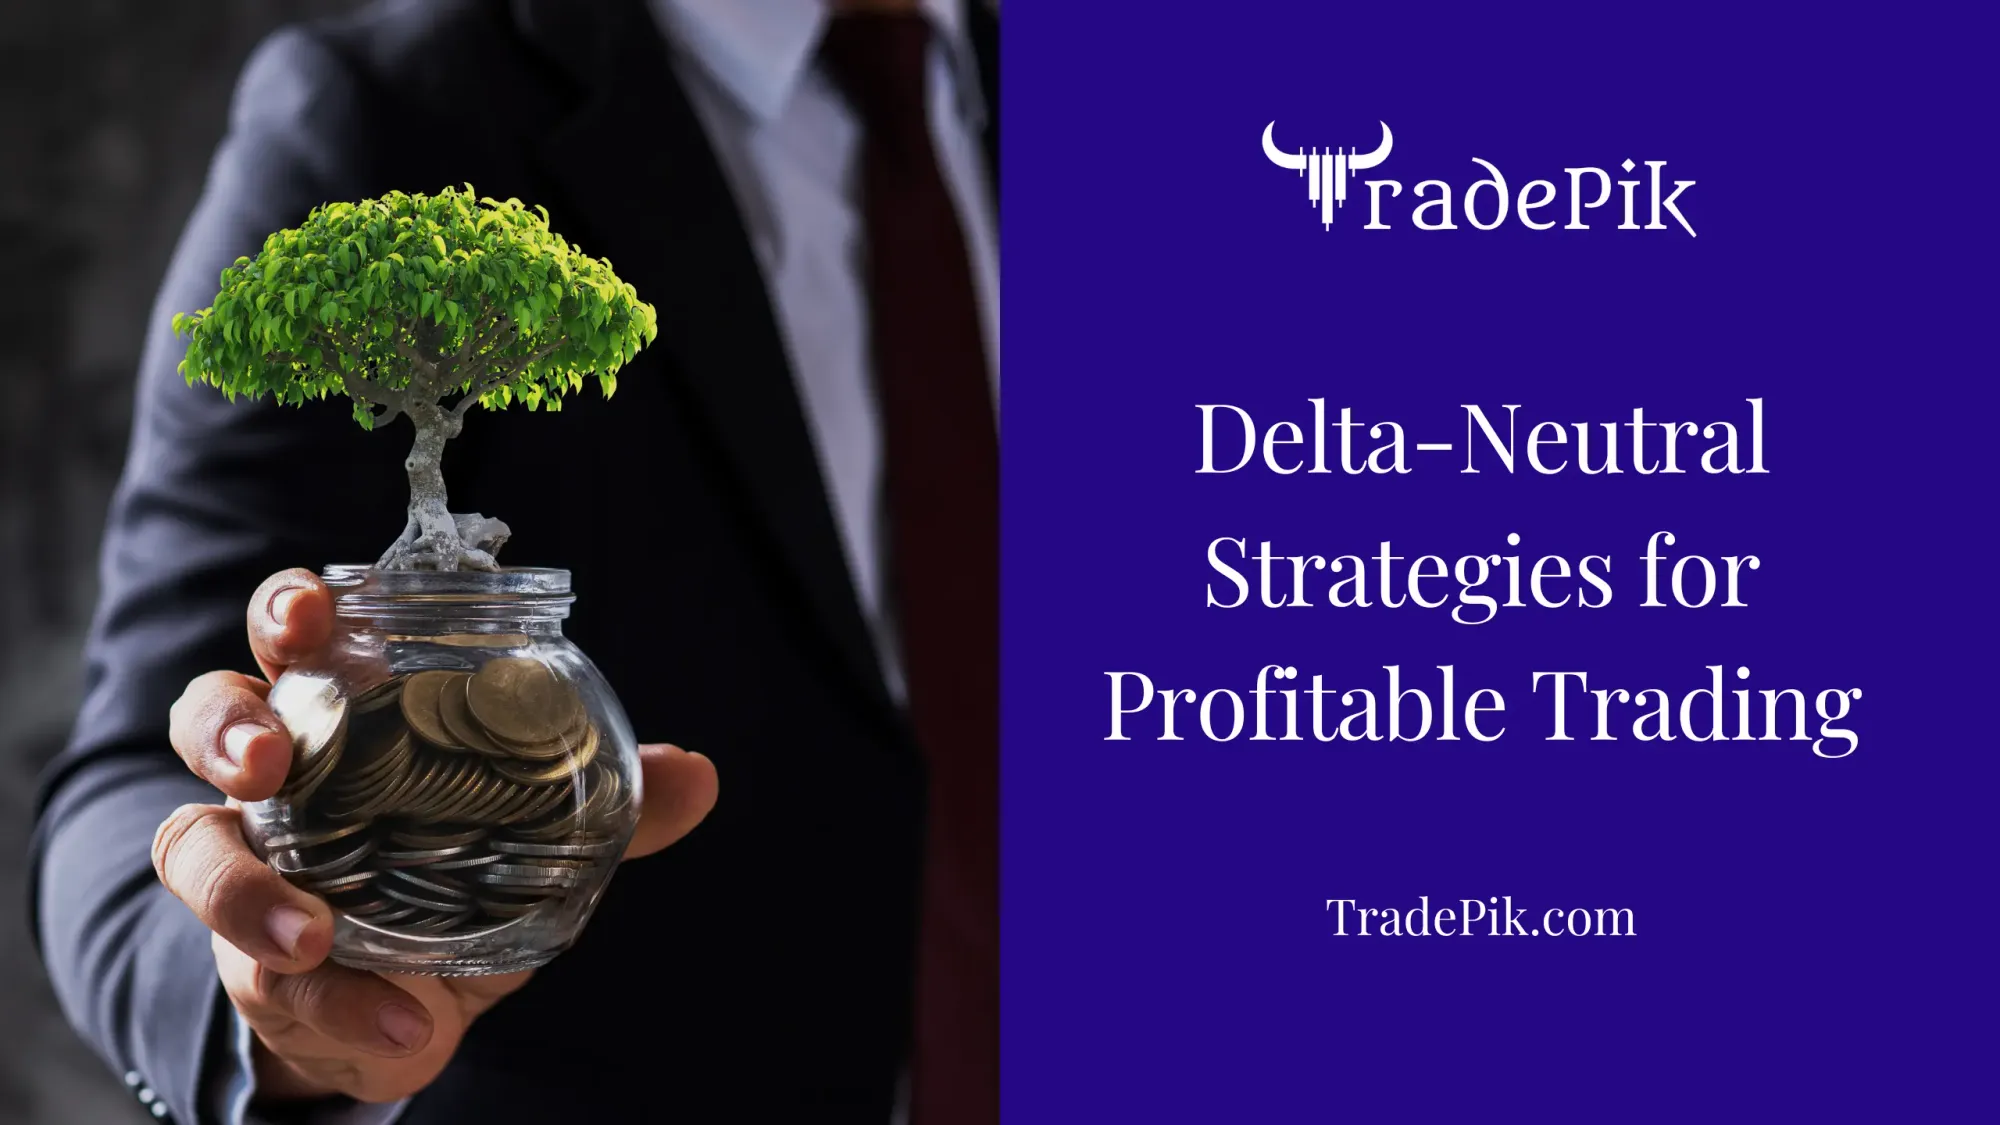 Delta-Neutral Strategies for Profitable Trading